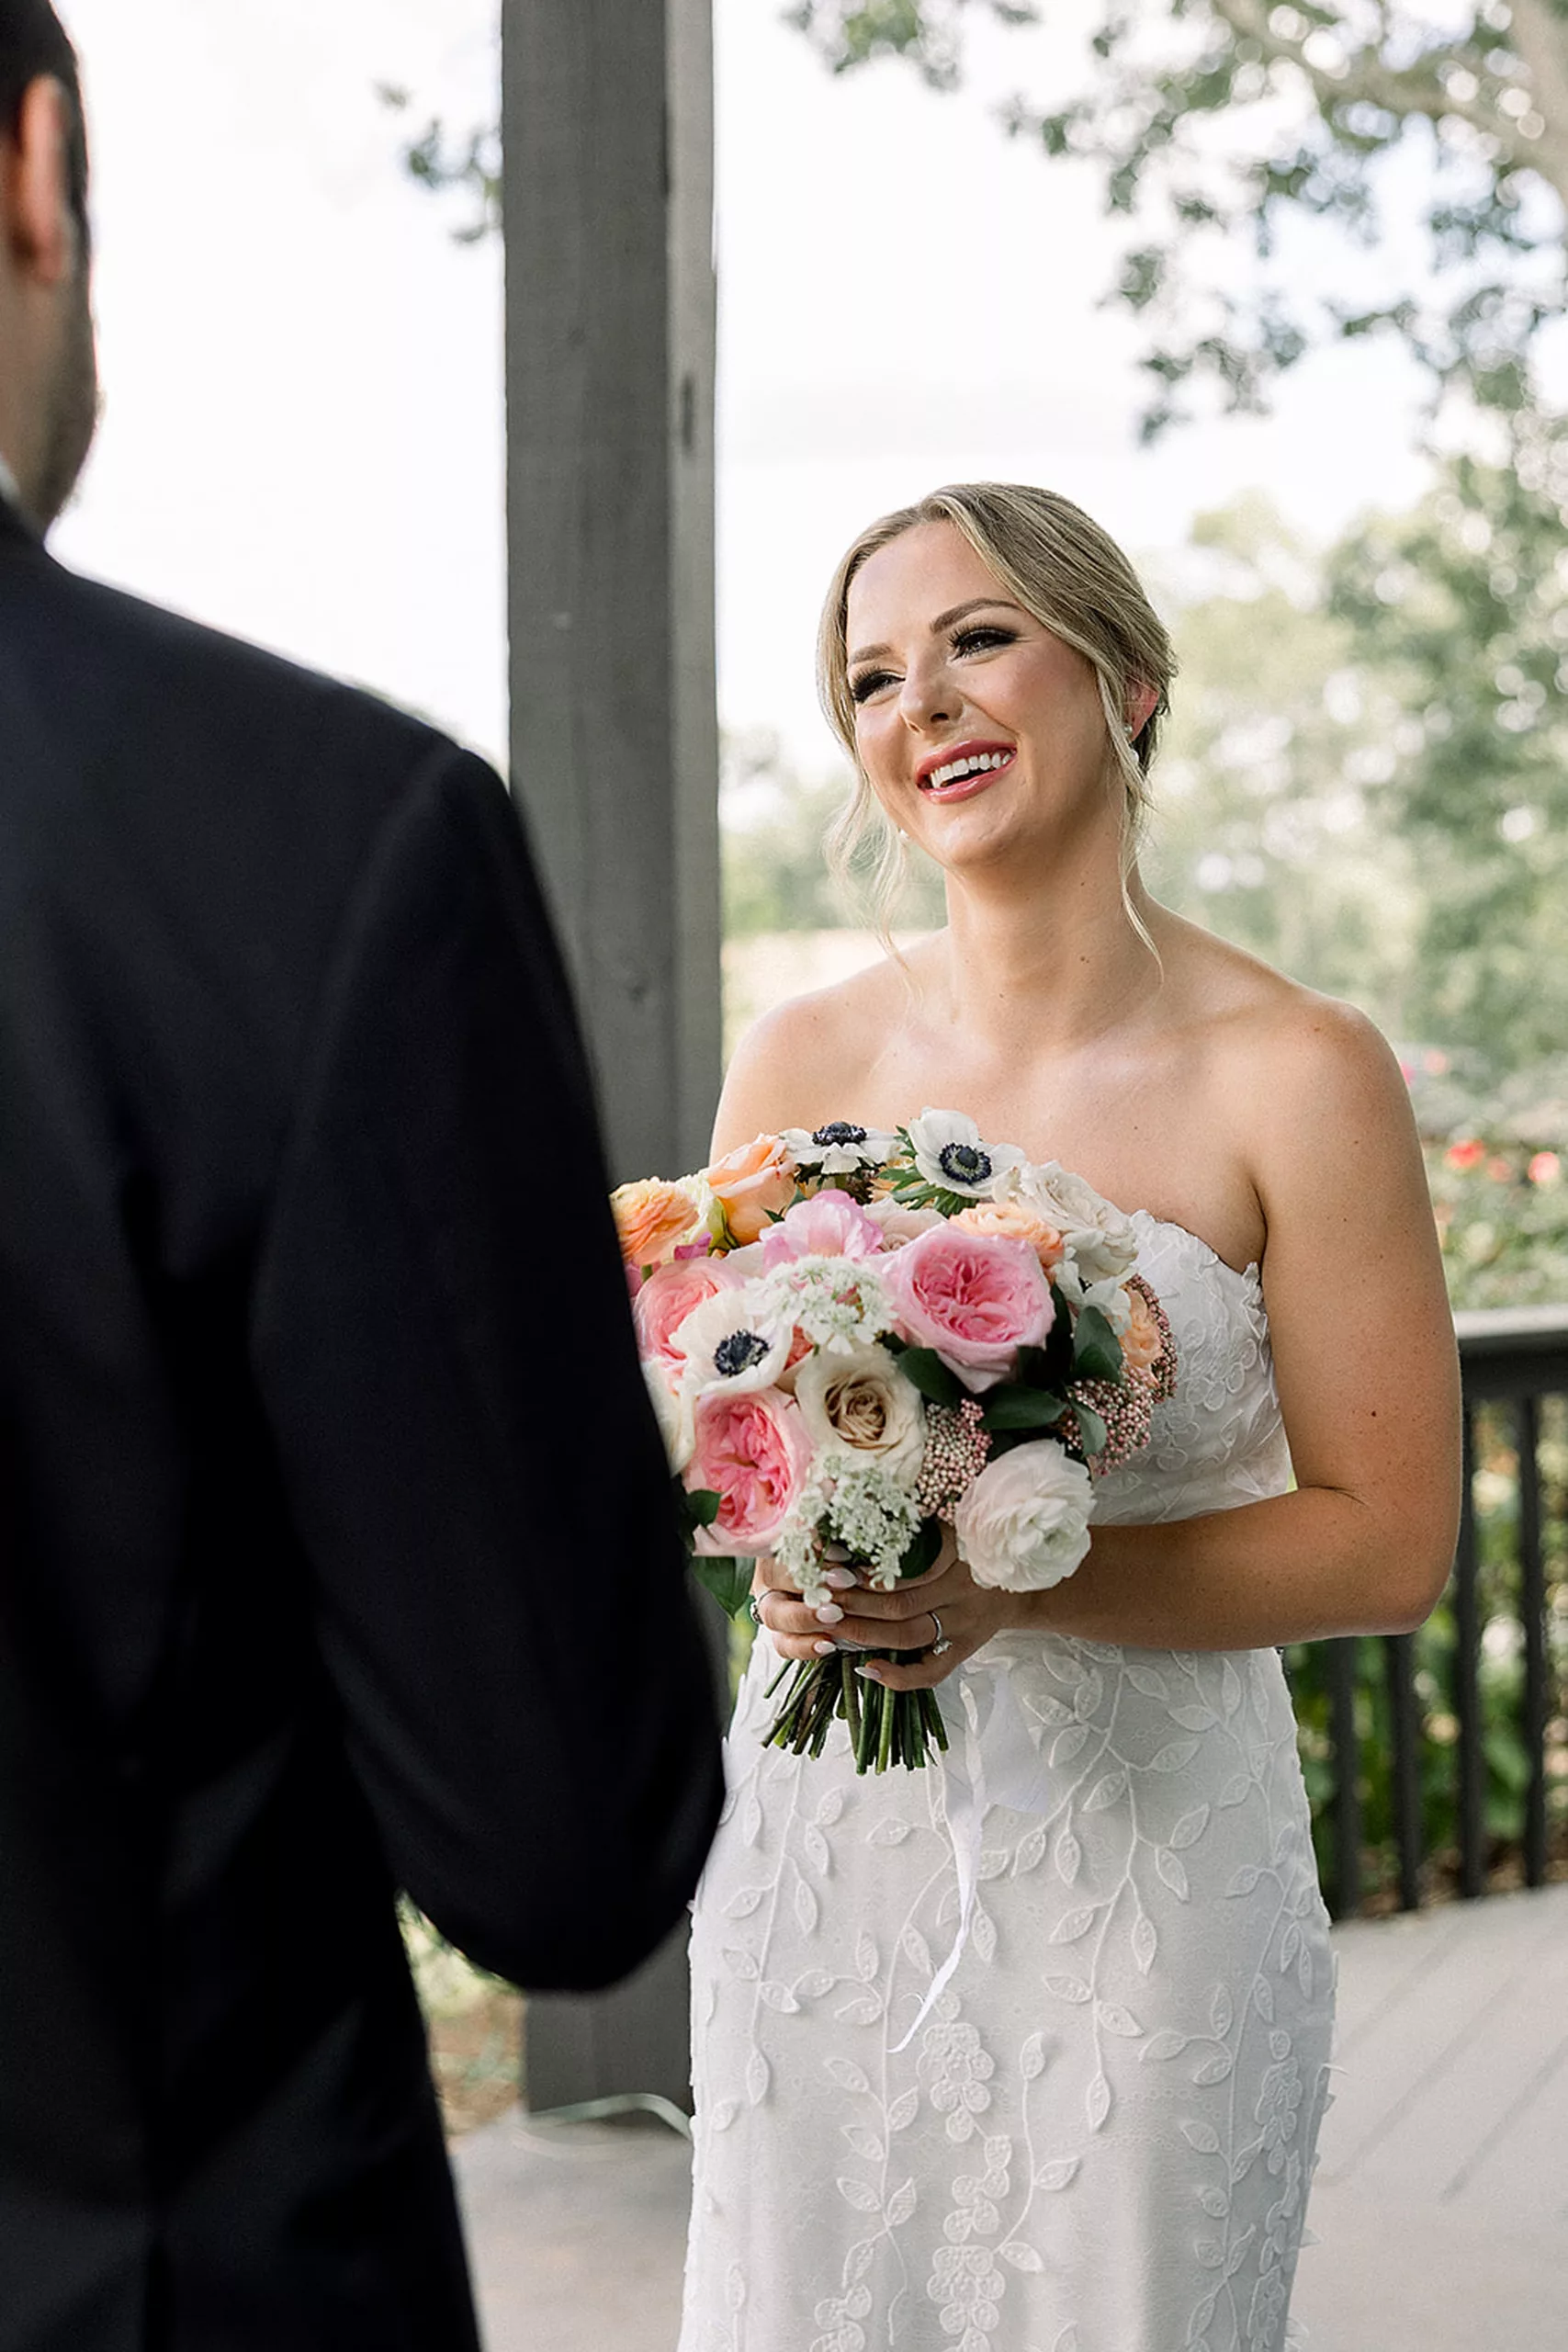 A bride smiles at her groom while holding her pink and white bouquet on a porch